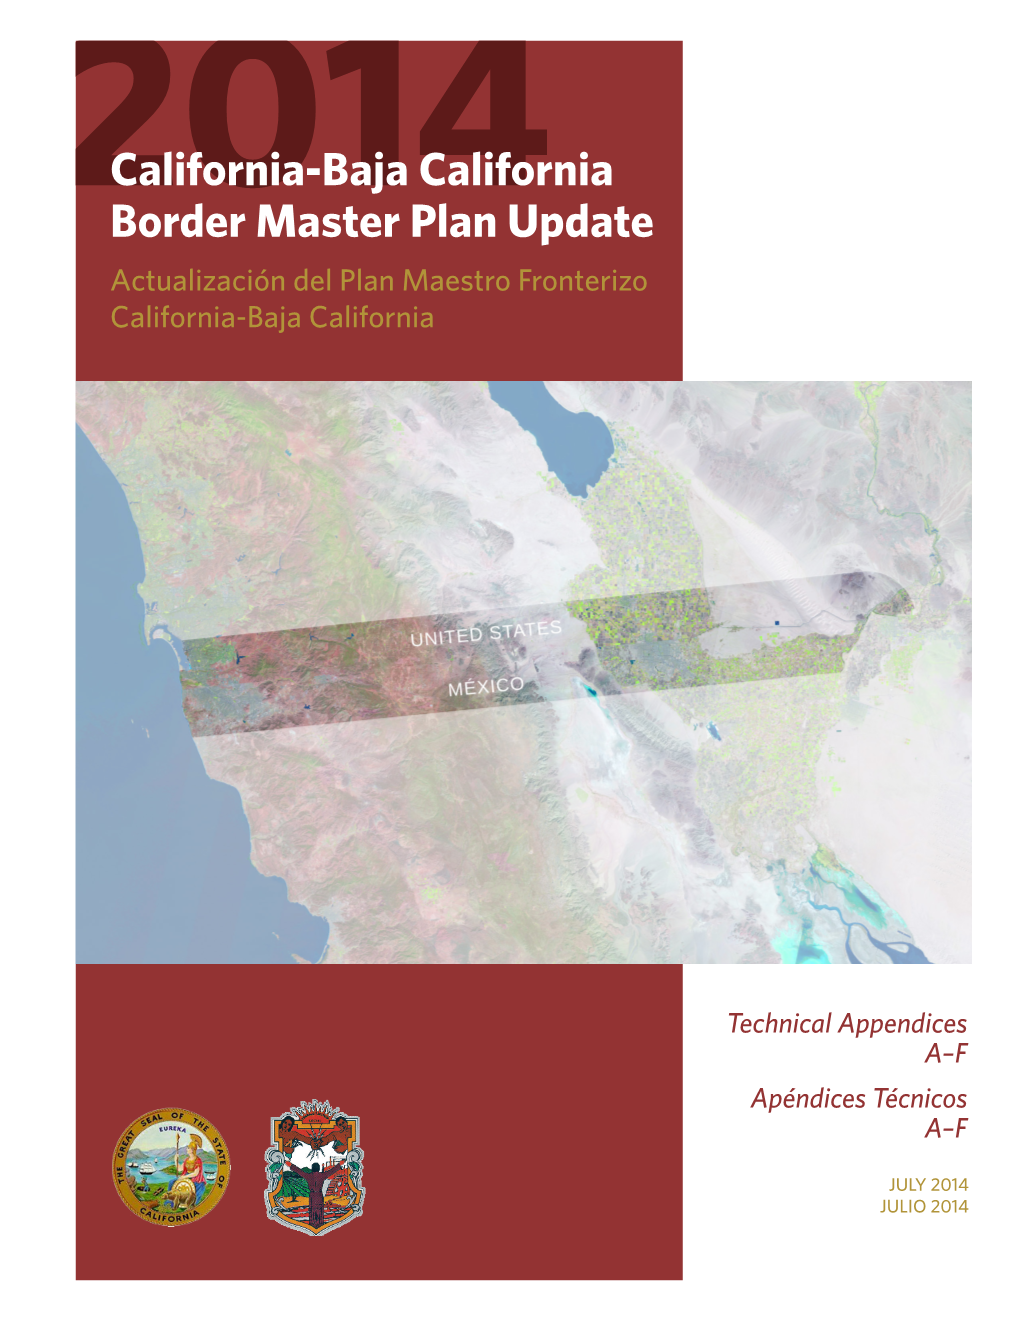 California-Baja California Border Master Plan Update Include a Task to Develop a Methodology and Establish New Evaluation Criteria to Rank Non-Motorized Projects C